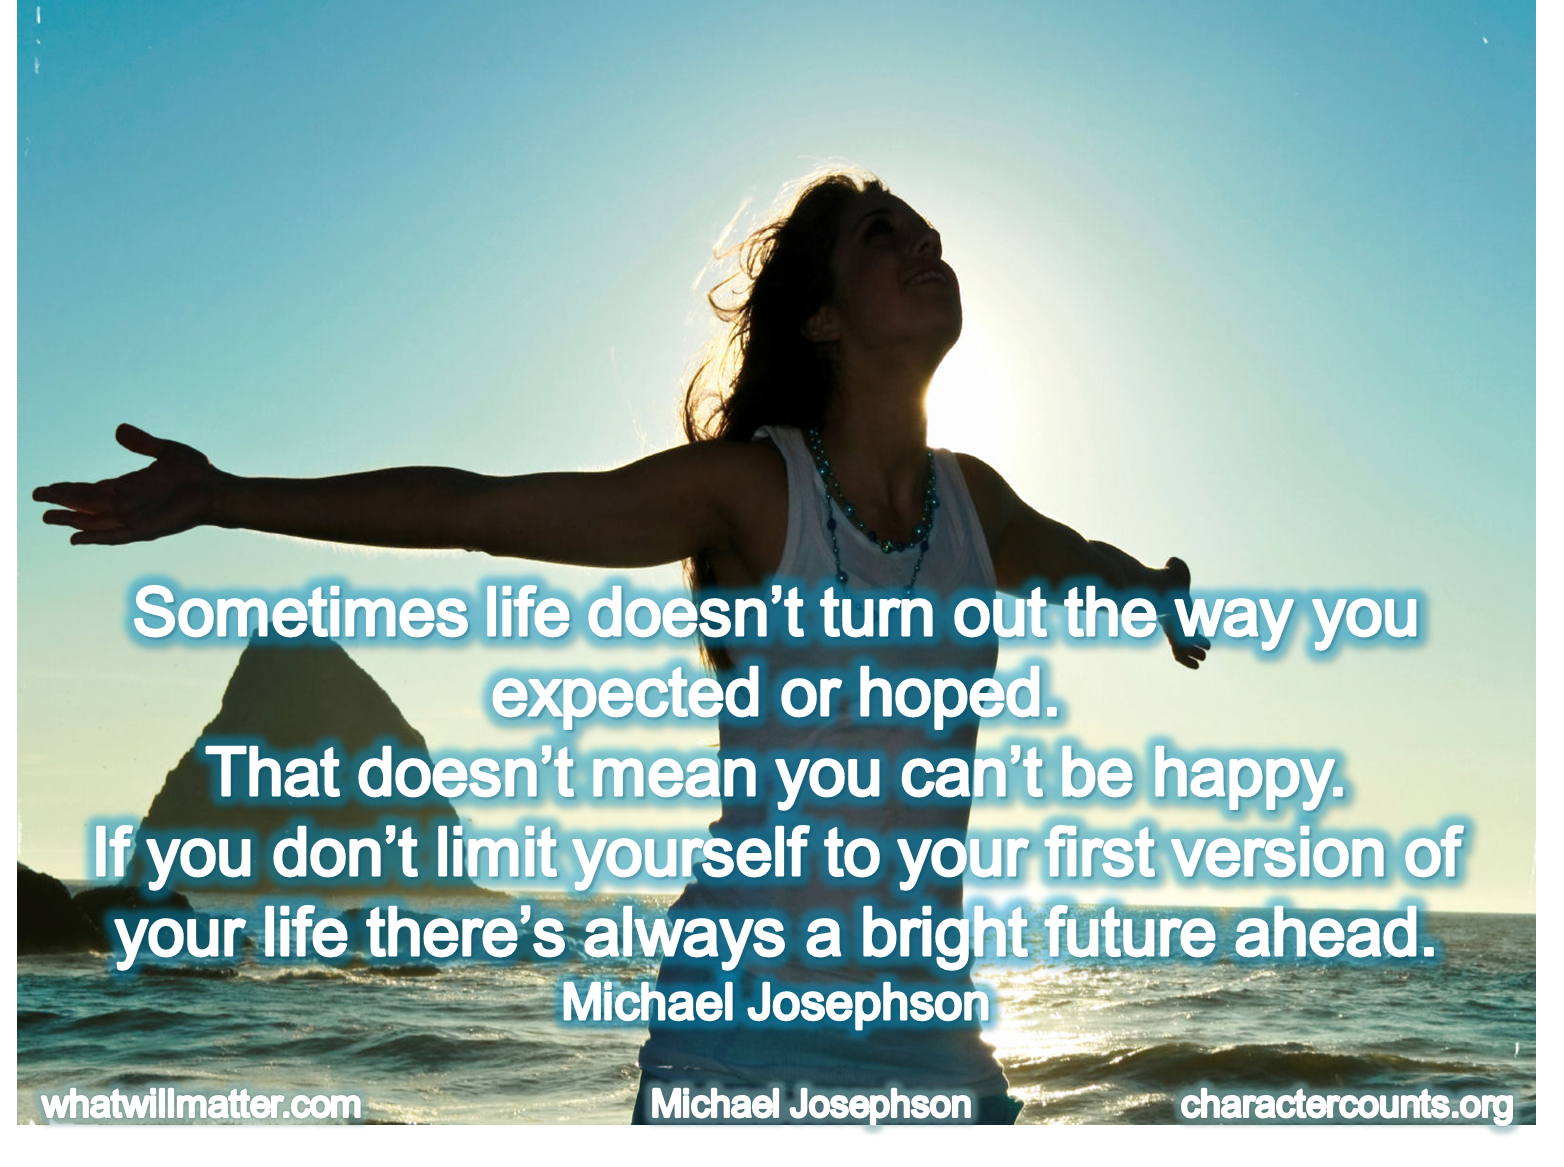 Bright Future quotes. Sometimes Life. Quotes about Bright Future. Be Happy with the way you are.